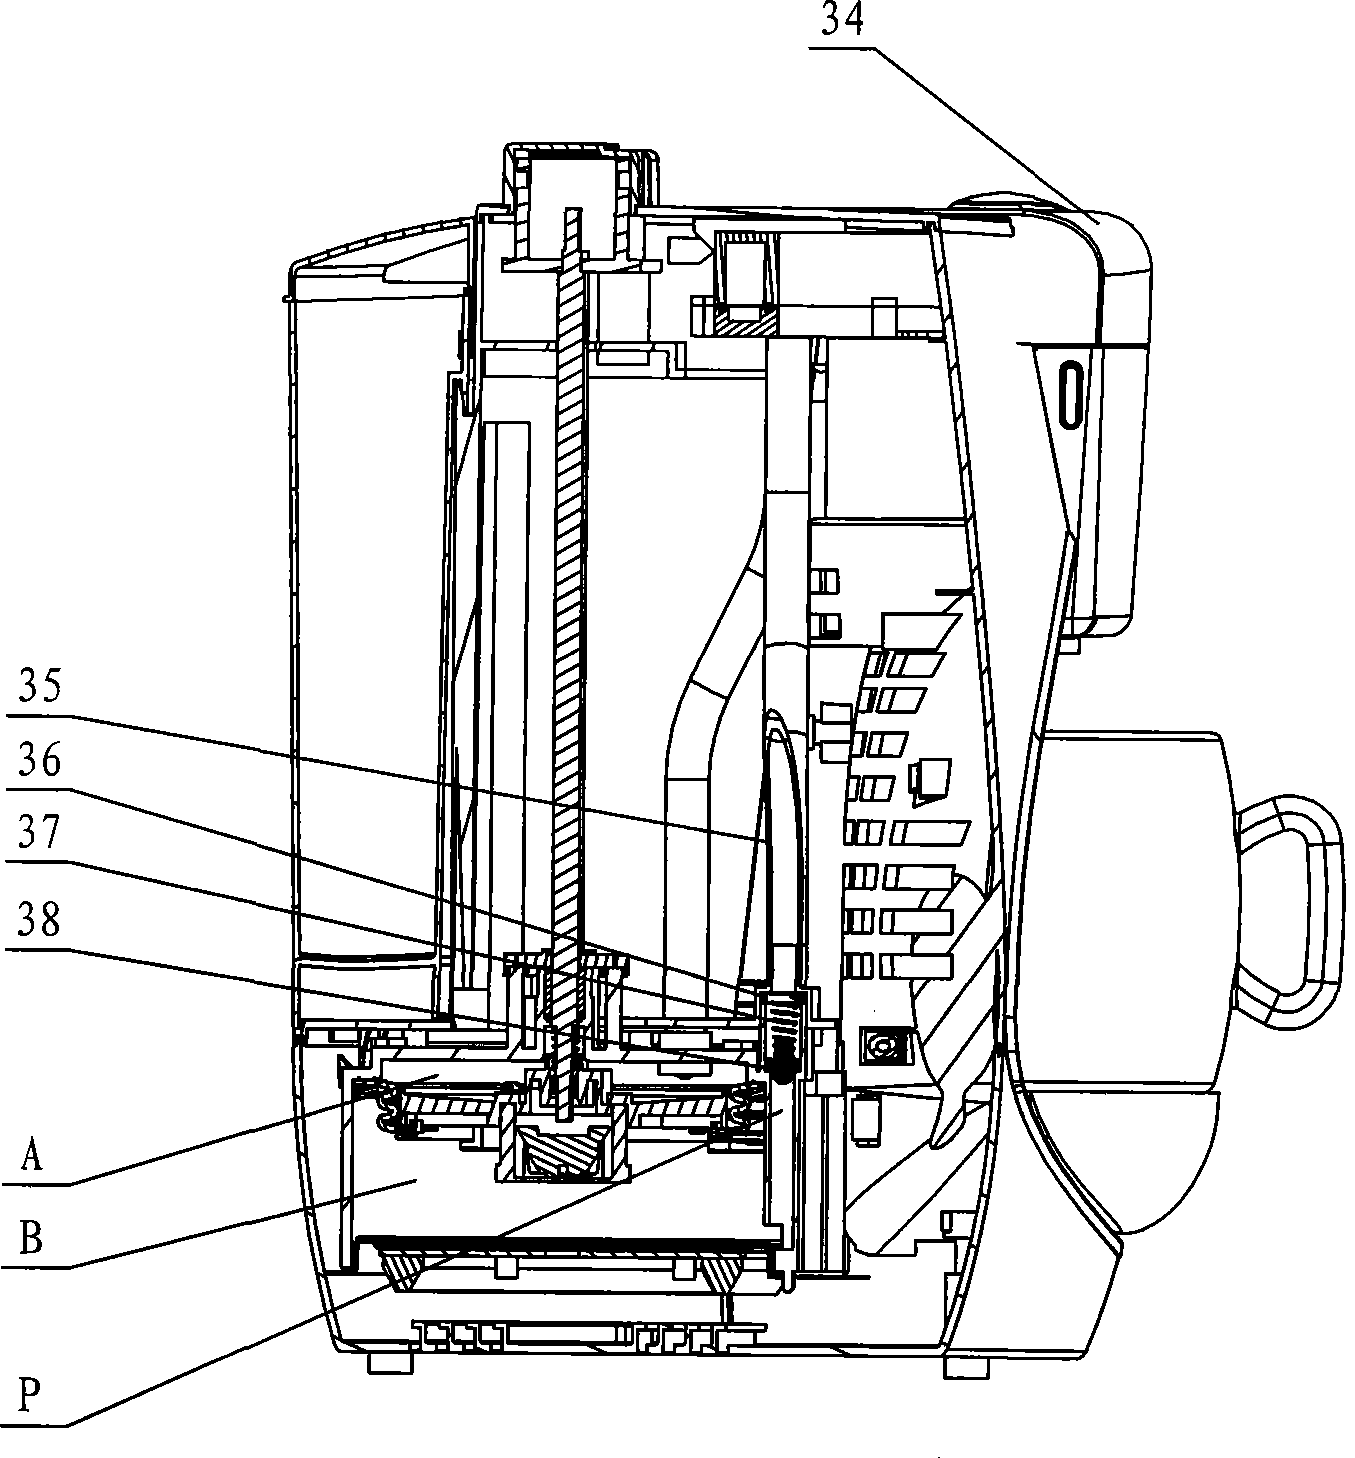 Heating device with adjustable water amount